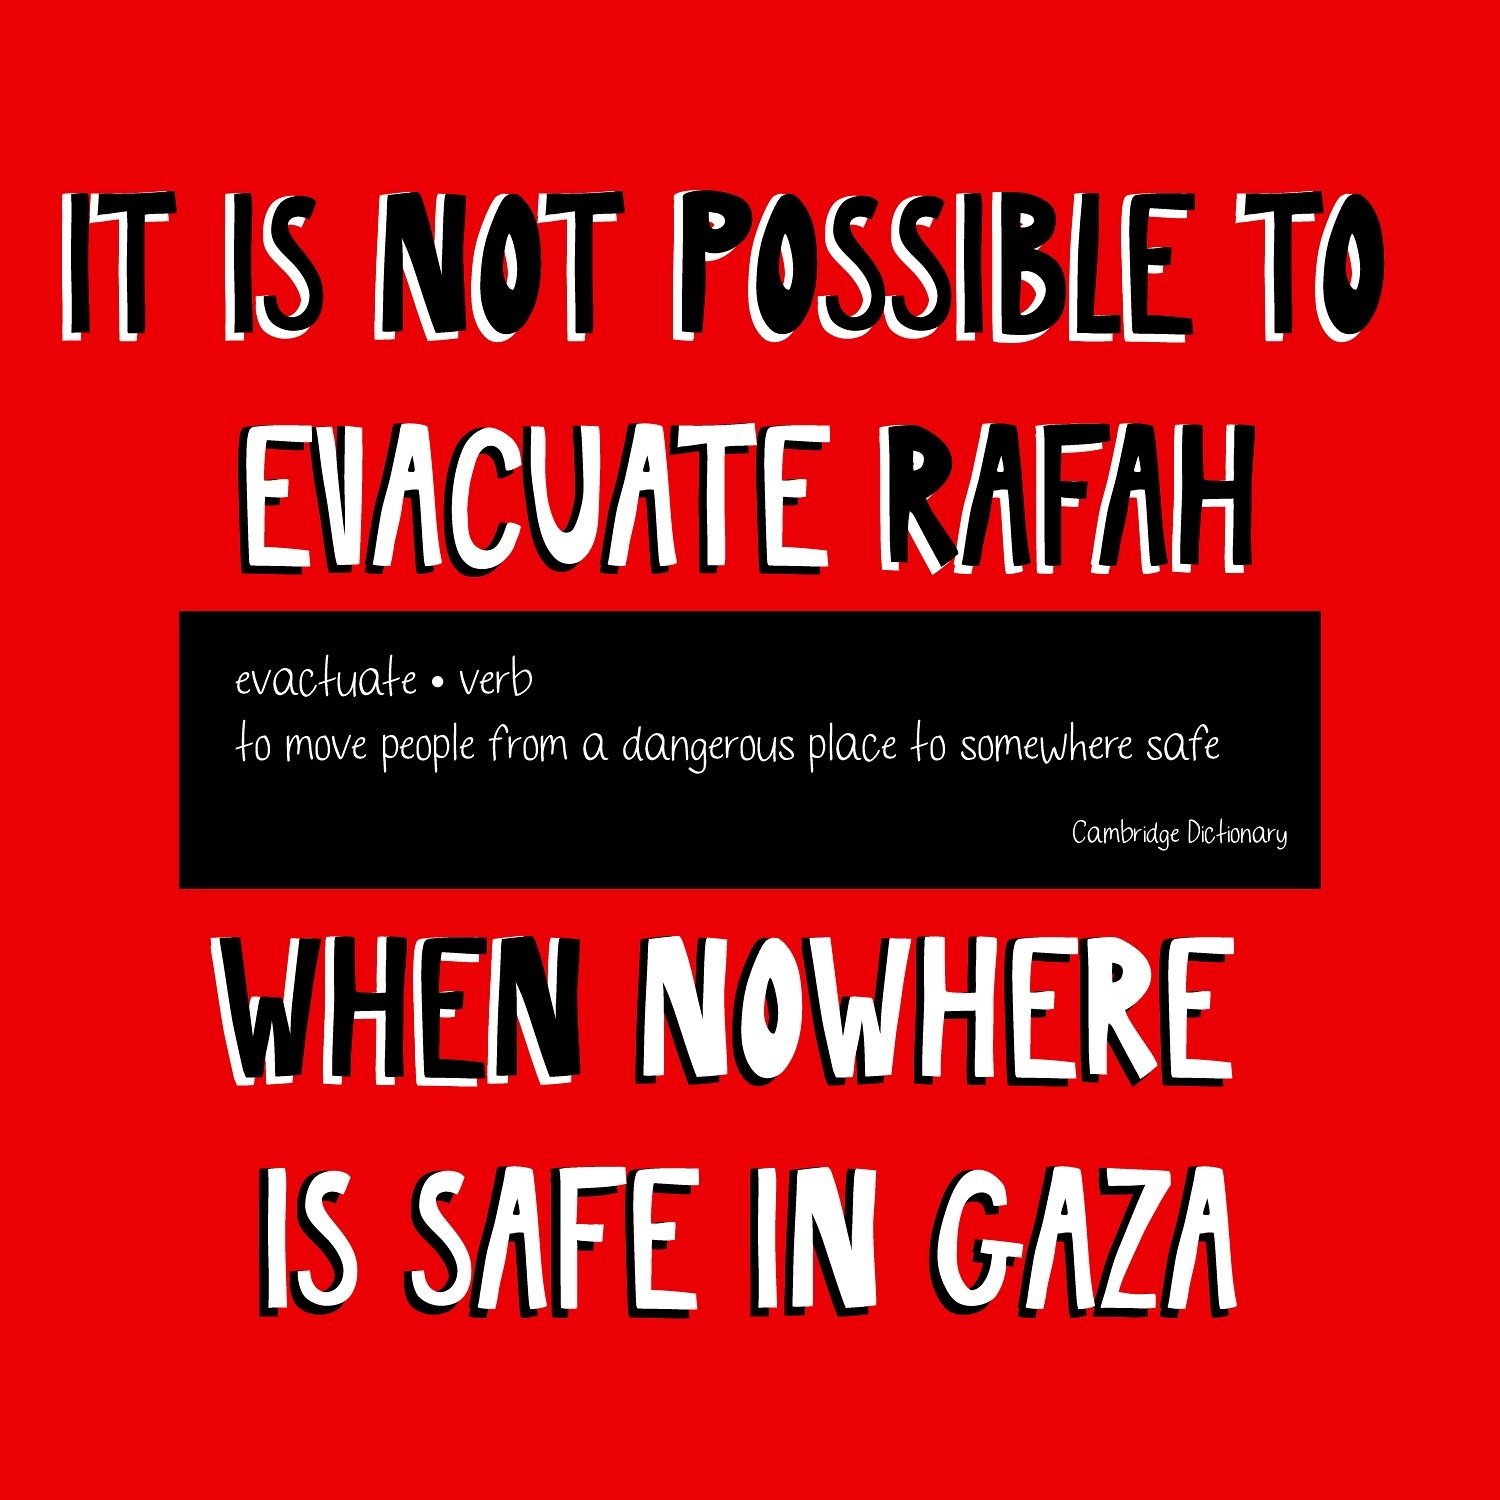 words mean things! there is no possible &ldquo;evacuation&rdquo; while the IOF continues indiscriminate bombings, while aid is cut off, while hospital infrastructure is incapacitated, while a famine is being created, while mass graves are uncovered &